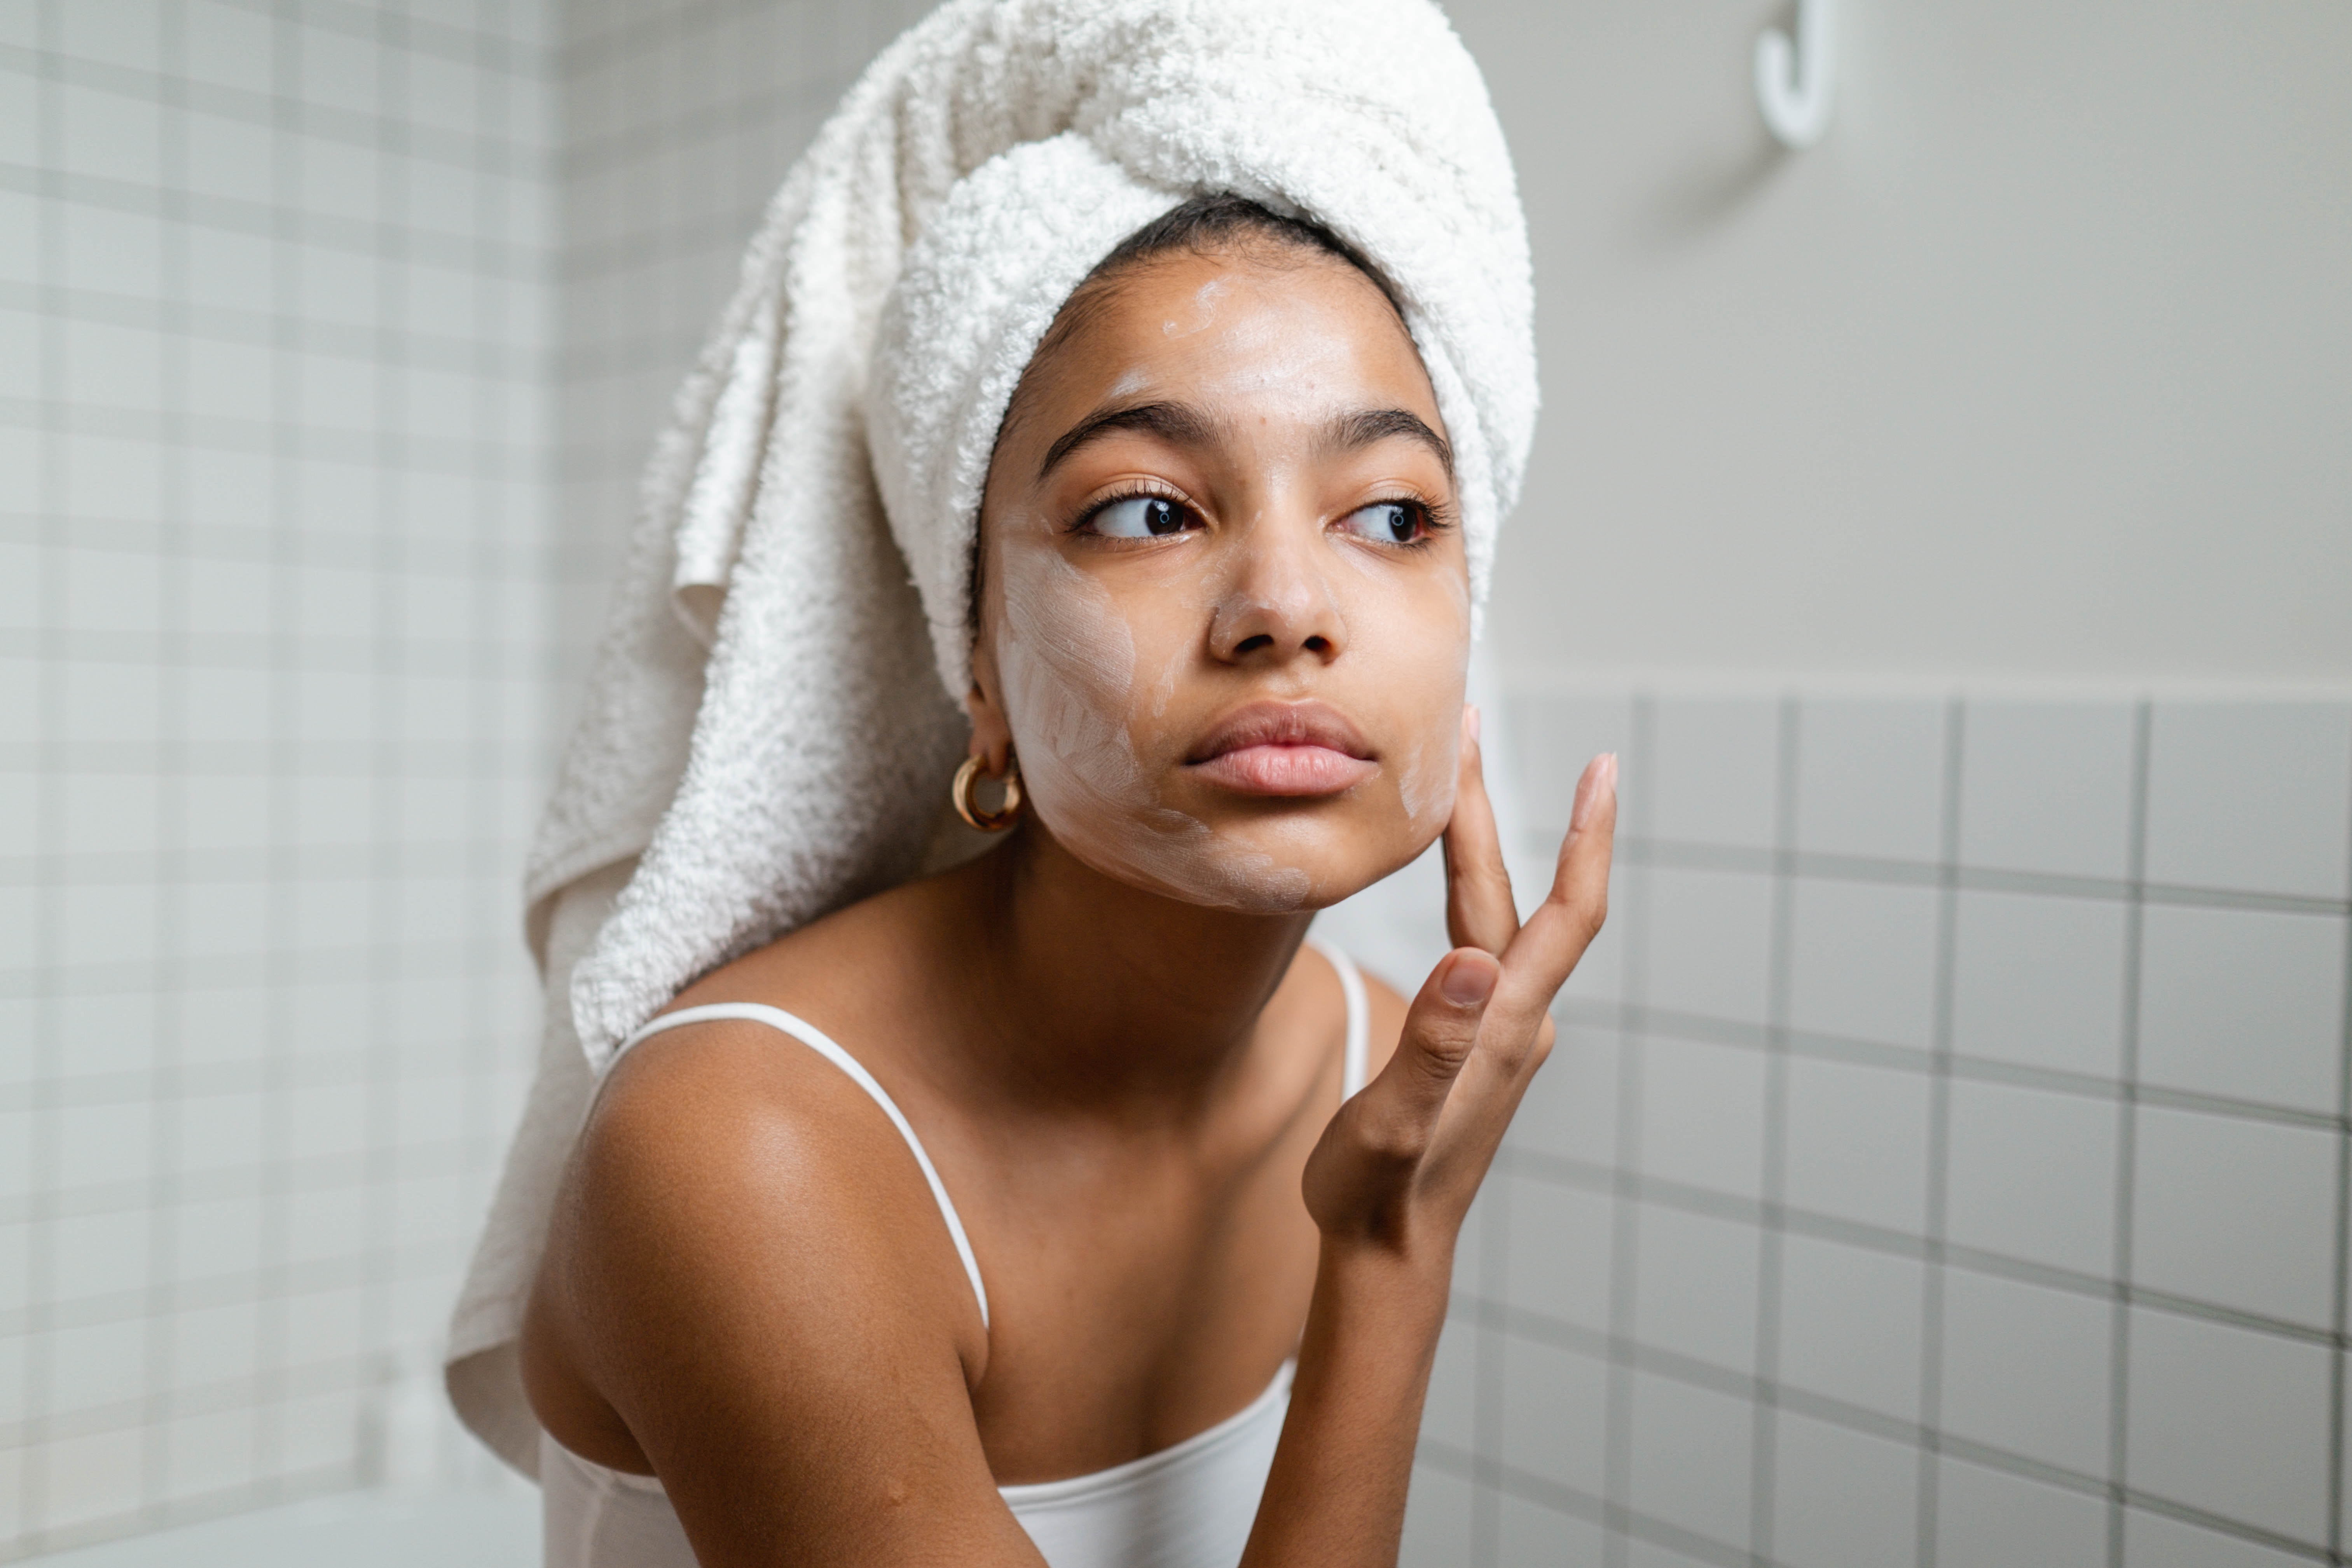 image of someone in a bathroom doing skincare